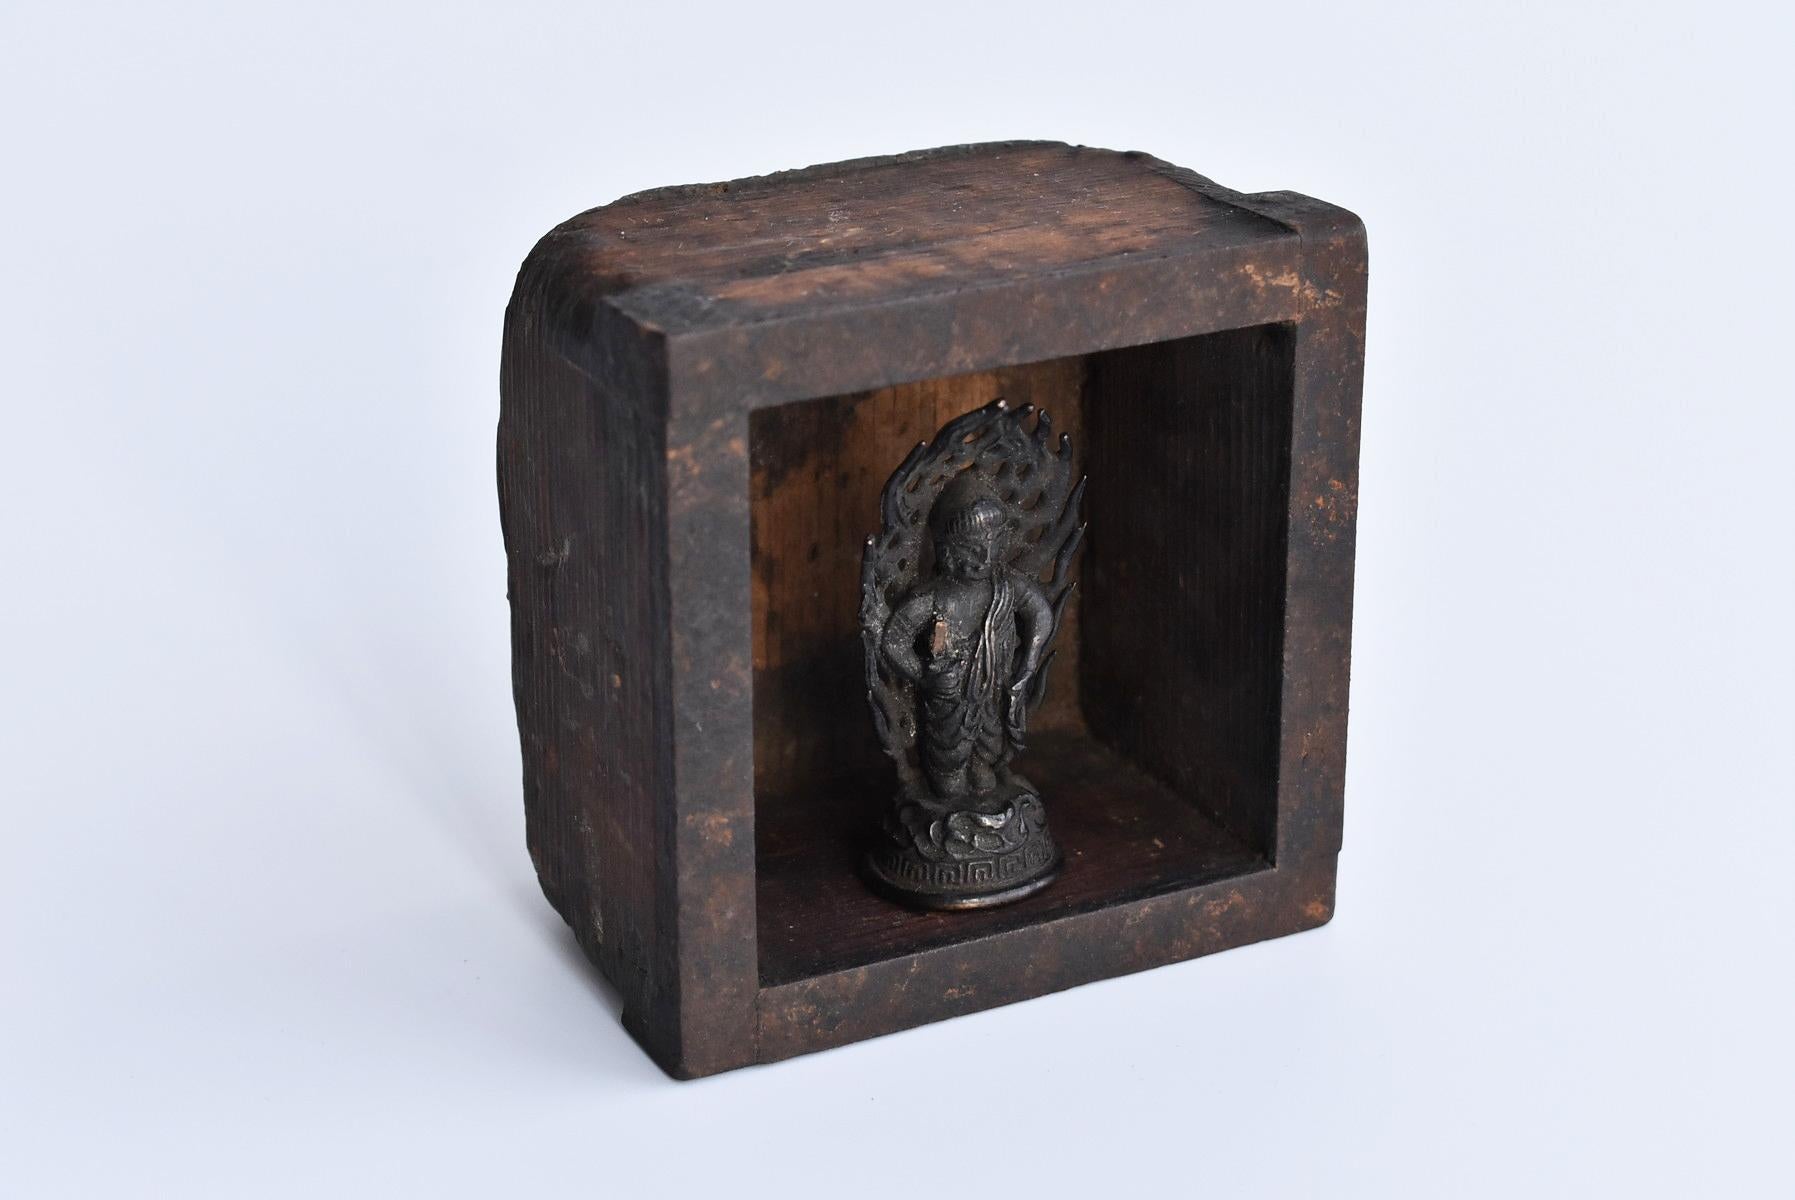 A small copper Buddha statue from the Muromachi period to the early Edo period (16th to 17th centuries) and a wooden box (Masu) from the Edo period.

The name of the Buddha statue is 